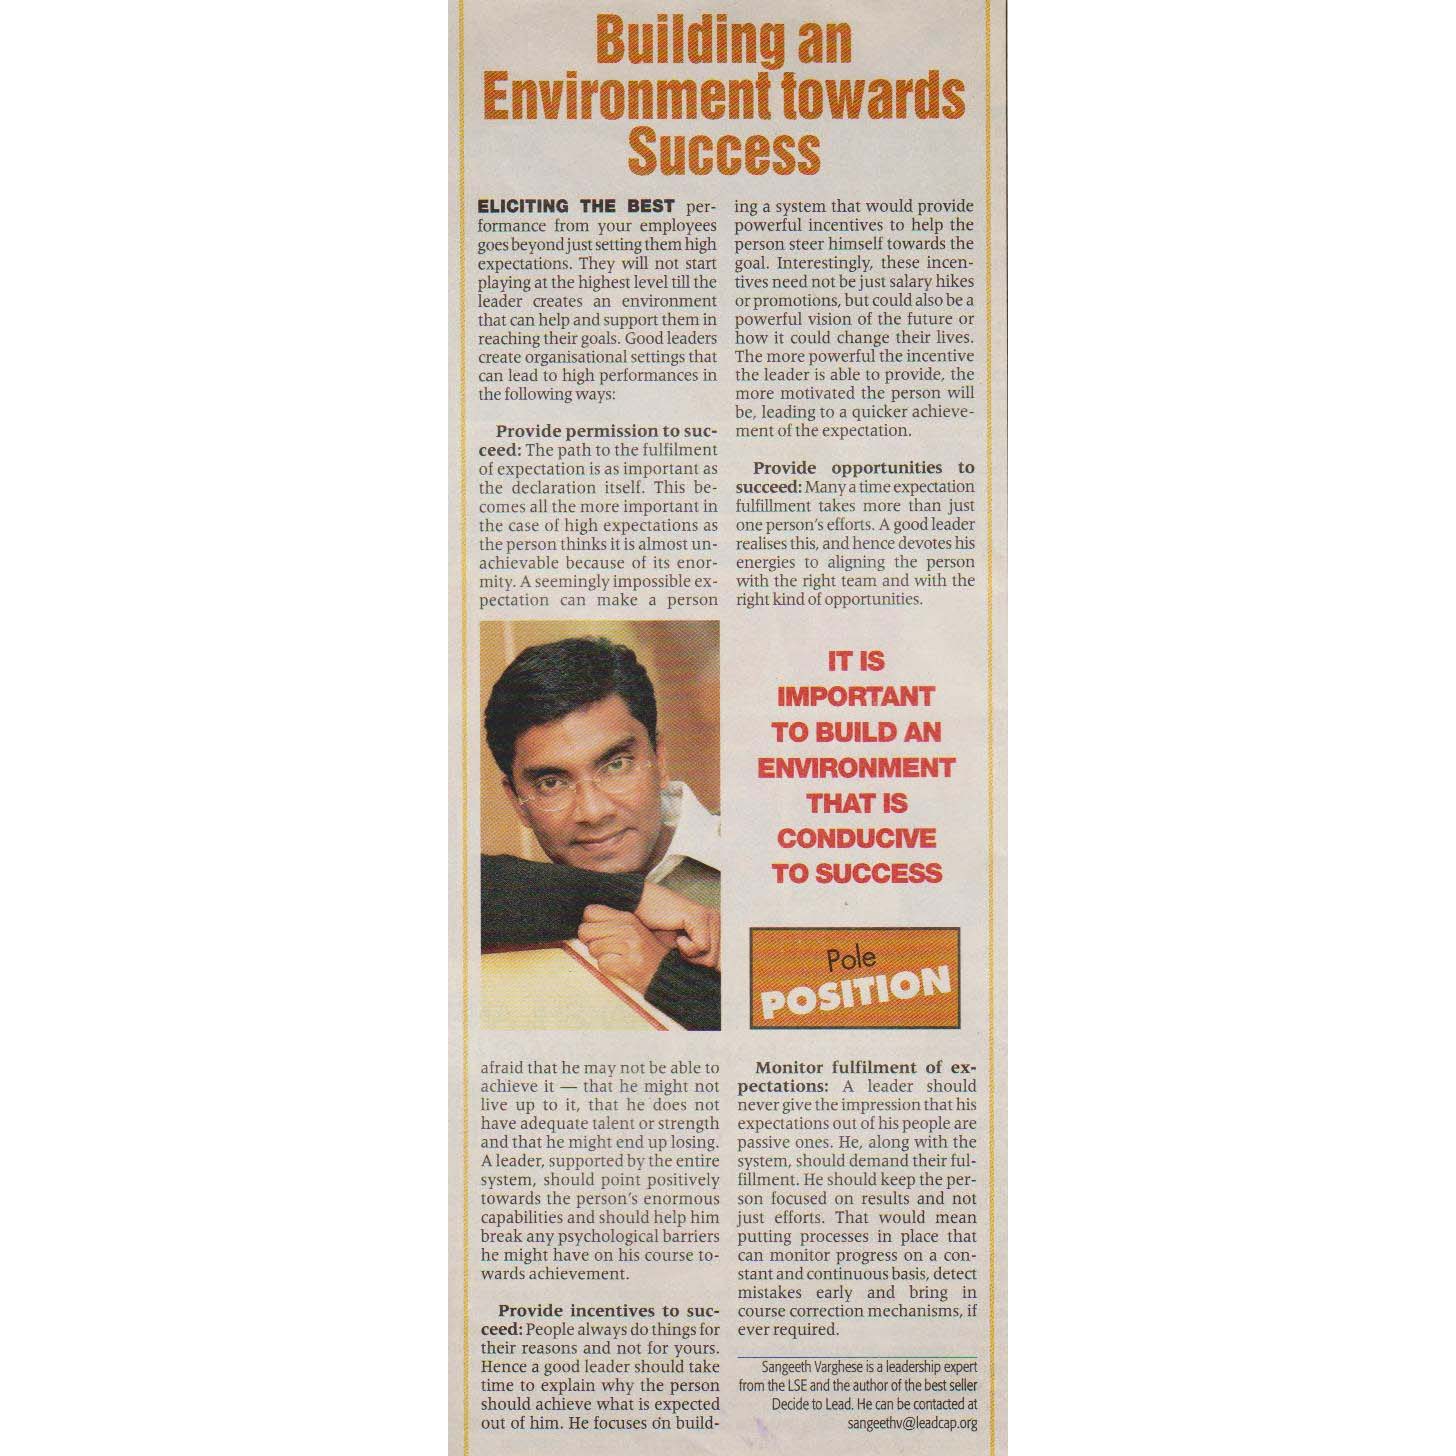 The Economic Times 24 October 2008